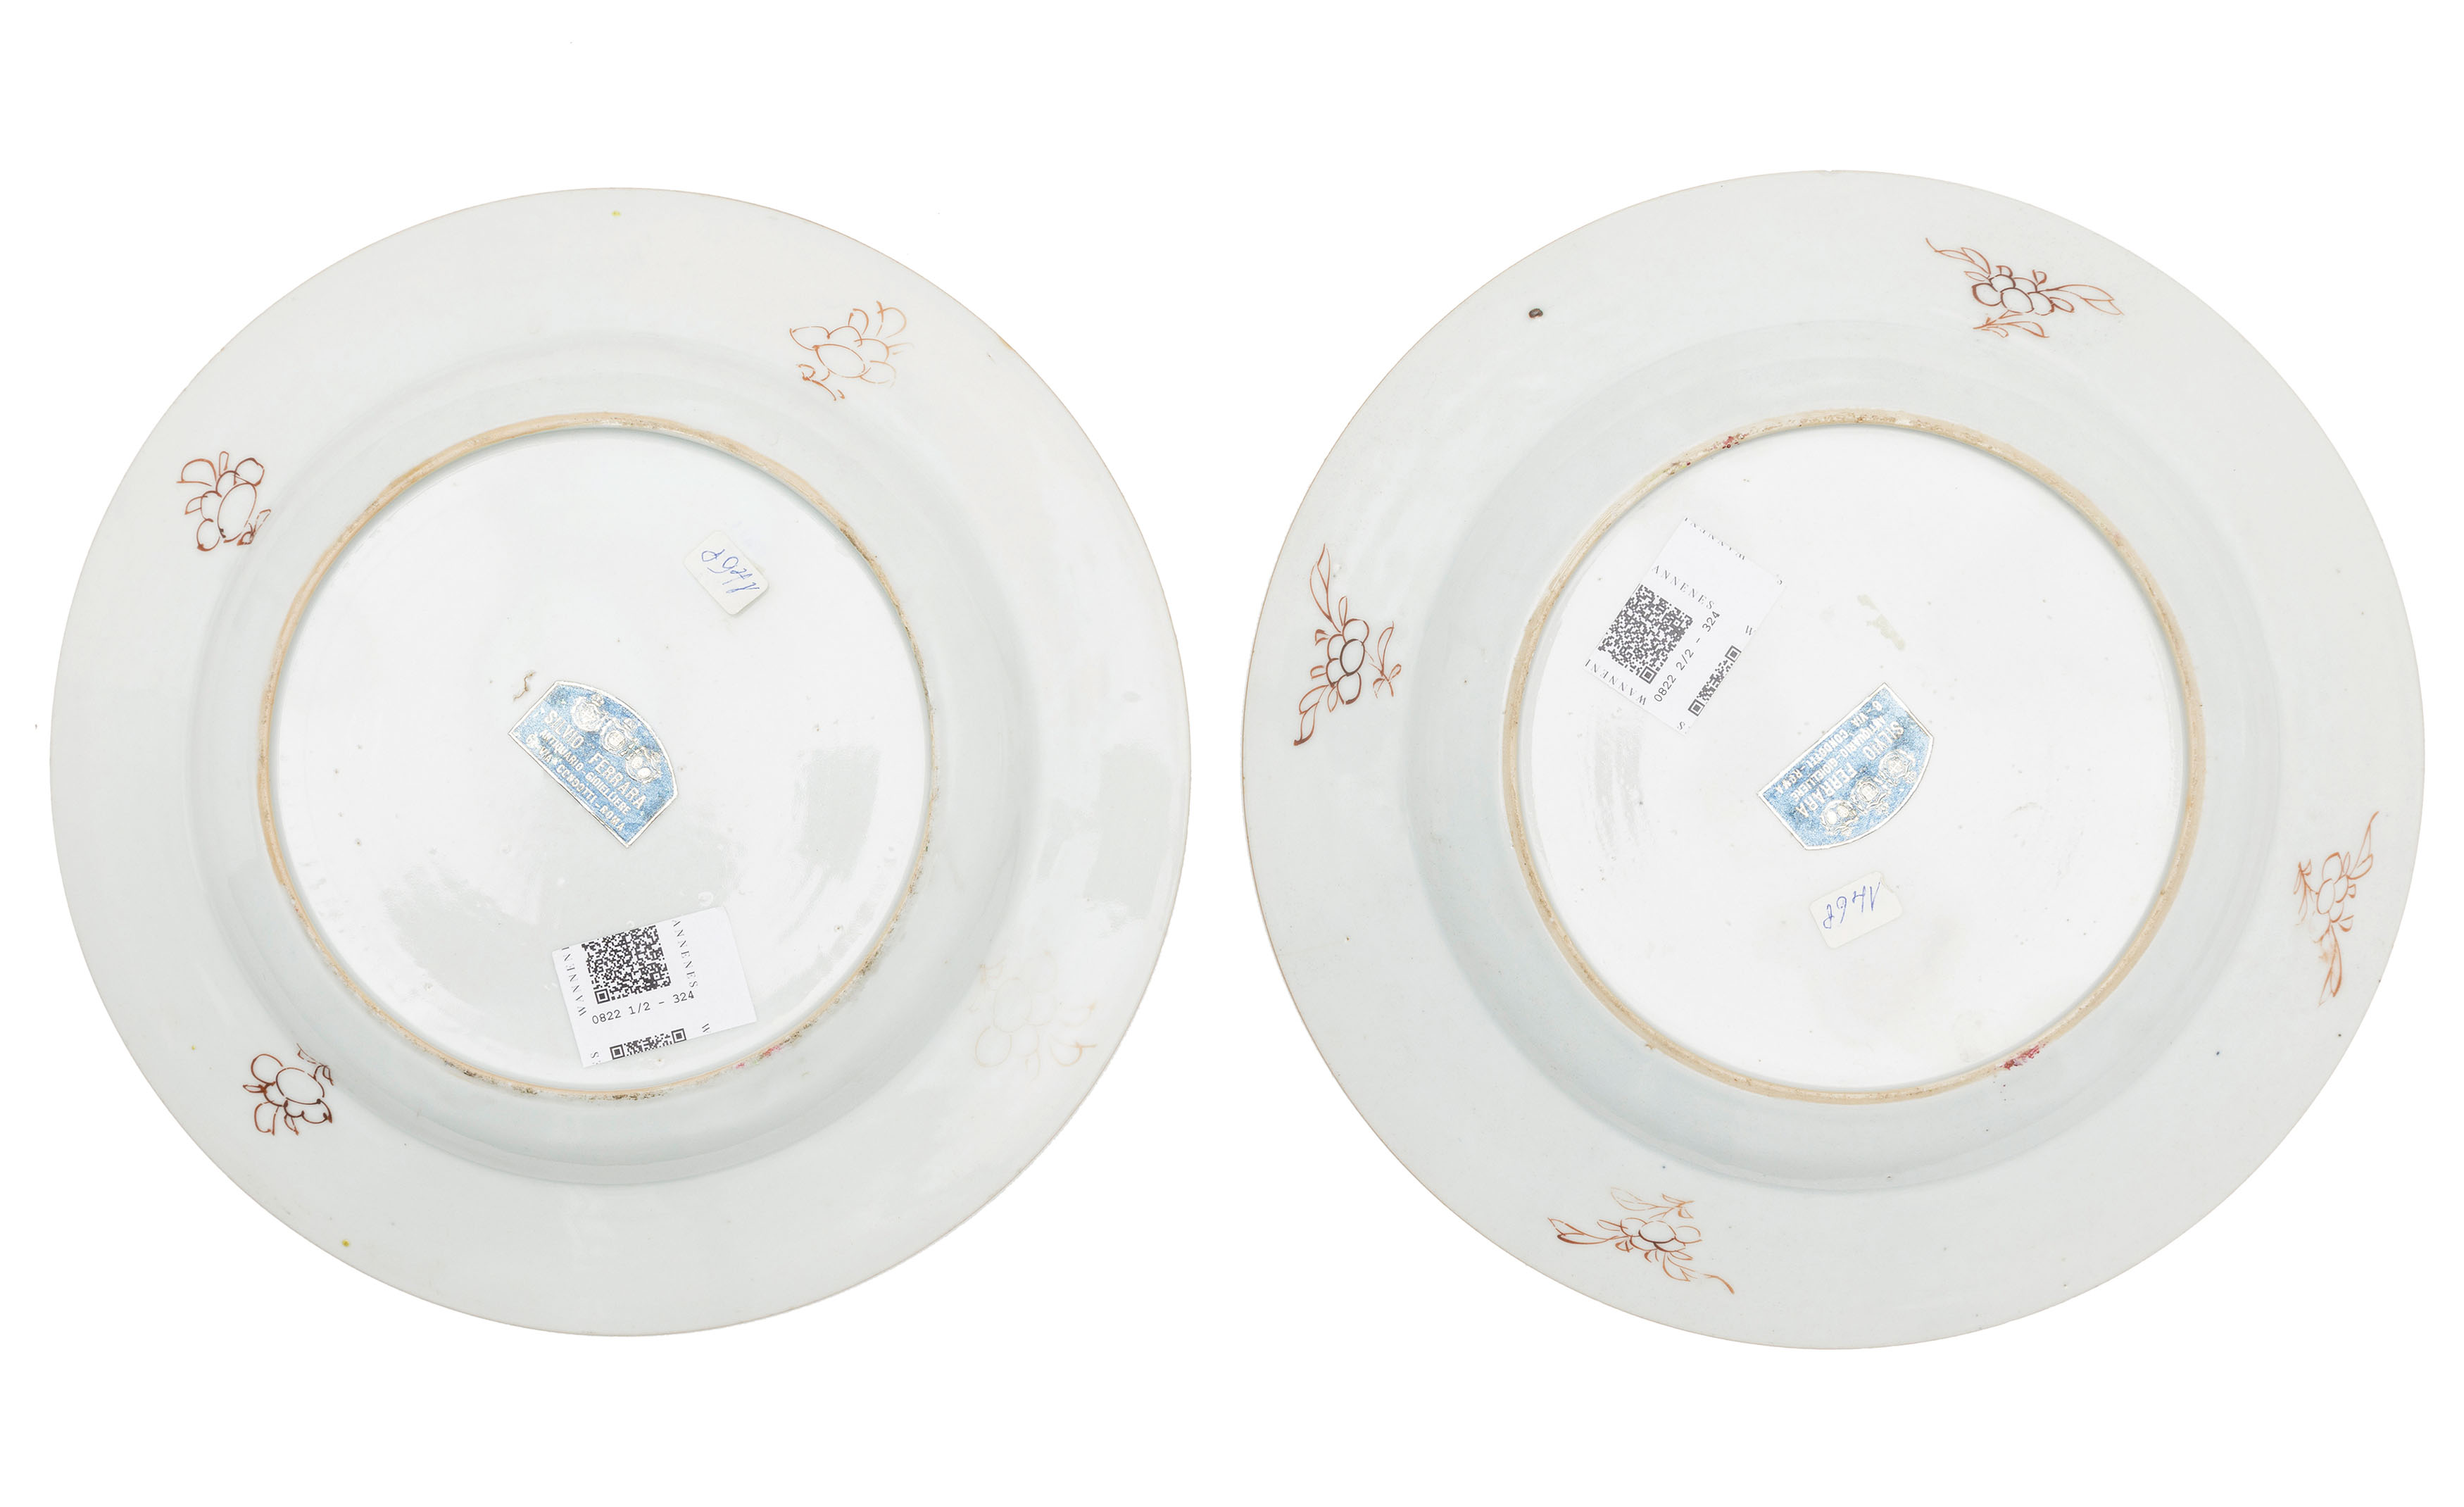 A PAIR OF FAMILLE ROSE PORCELAIN DISHES, CHINA, 18TH CENTURY (2) - Image 2 of 2